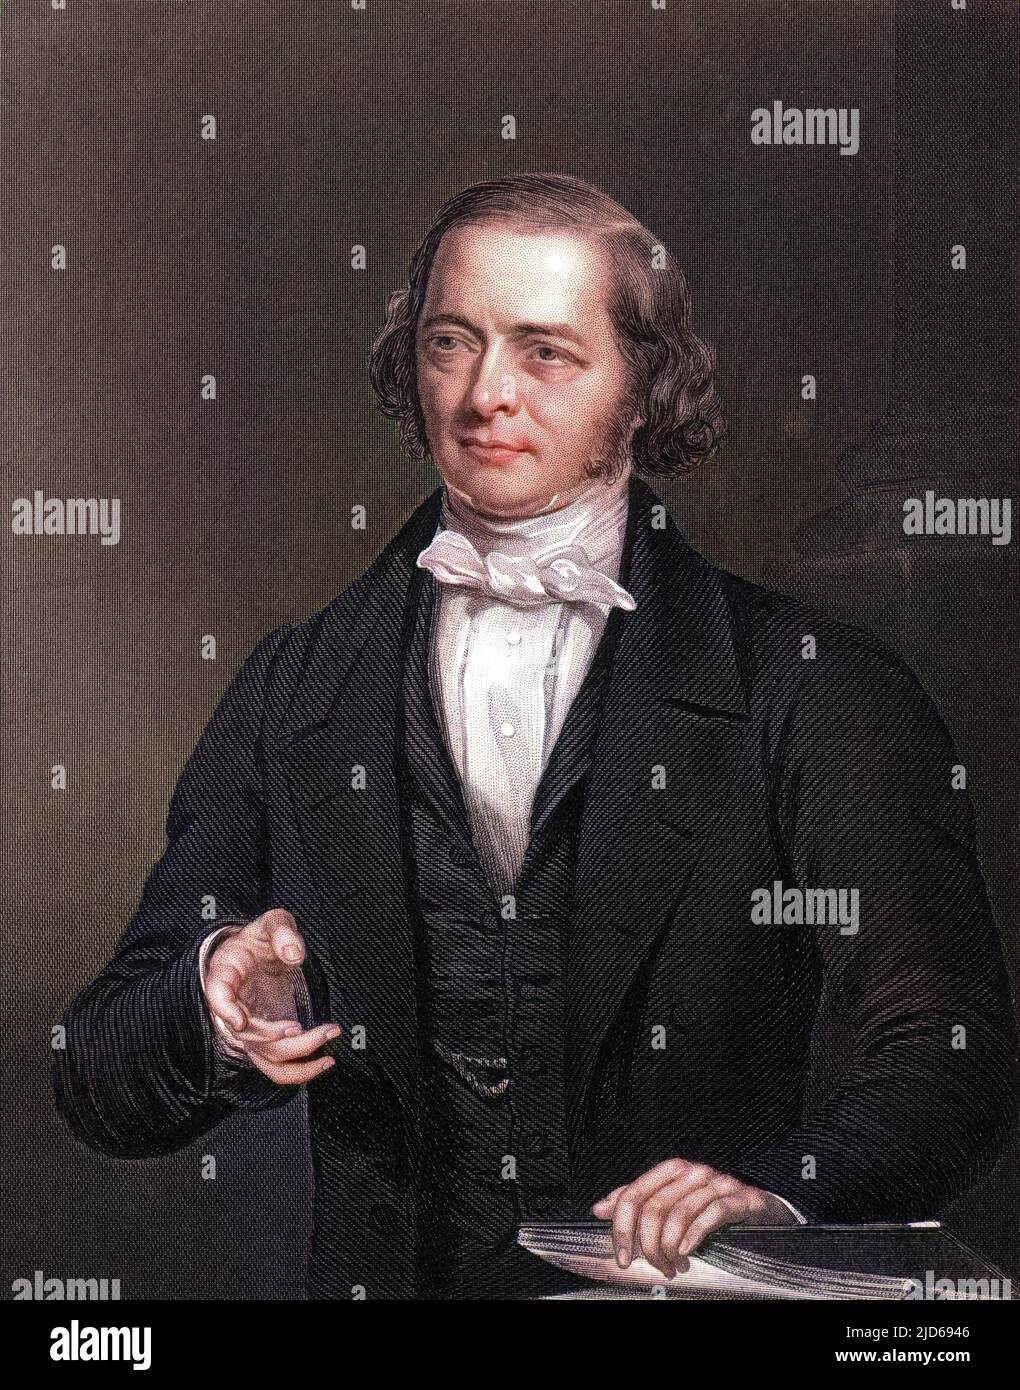 JOHN HARRIS Churchman : principal of New College, London, and author of 'Mammon' : gesticulating. Colourised version of : 10160414       Date: 1802 - 1856 Stock Photo